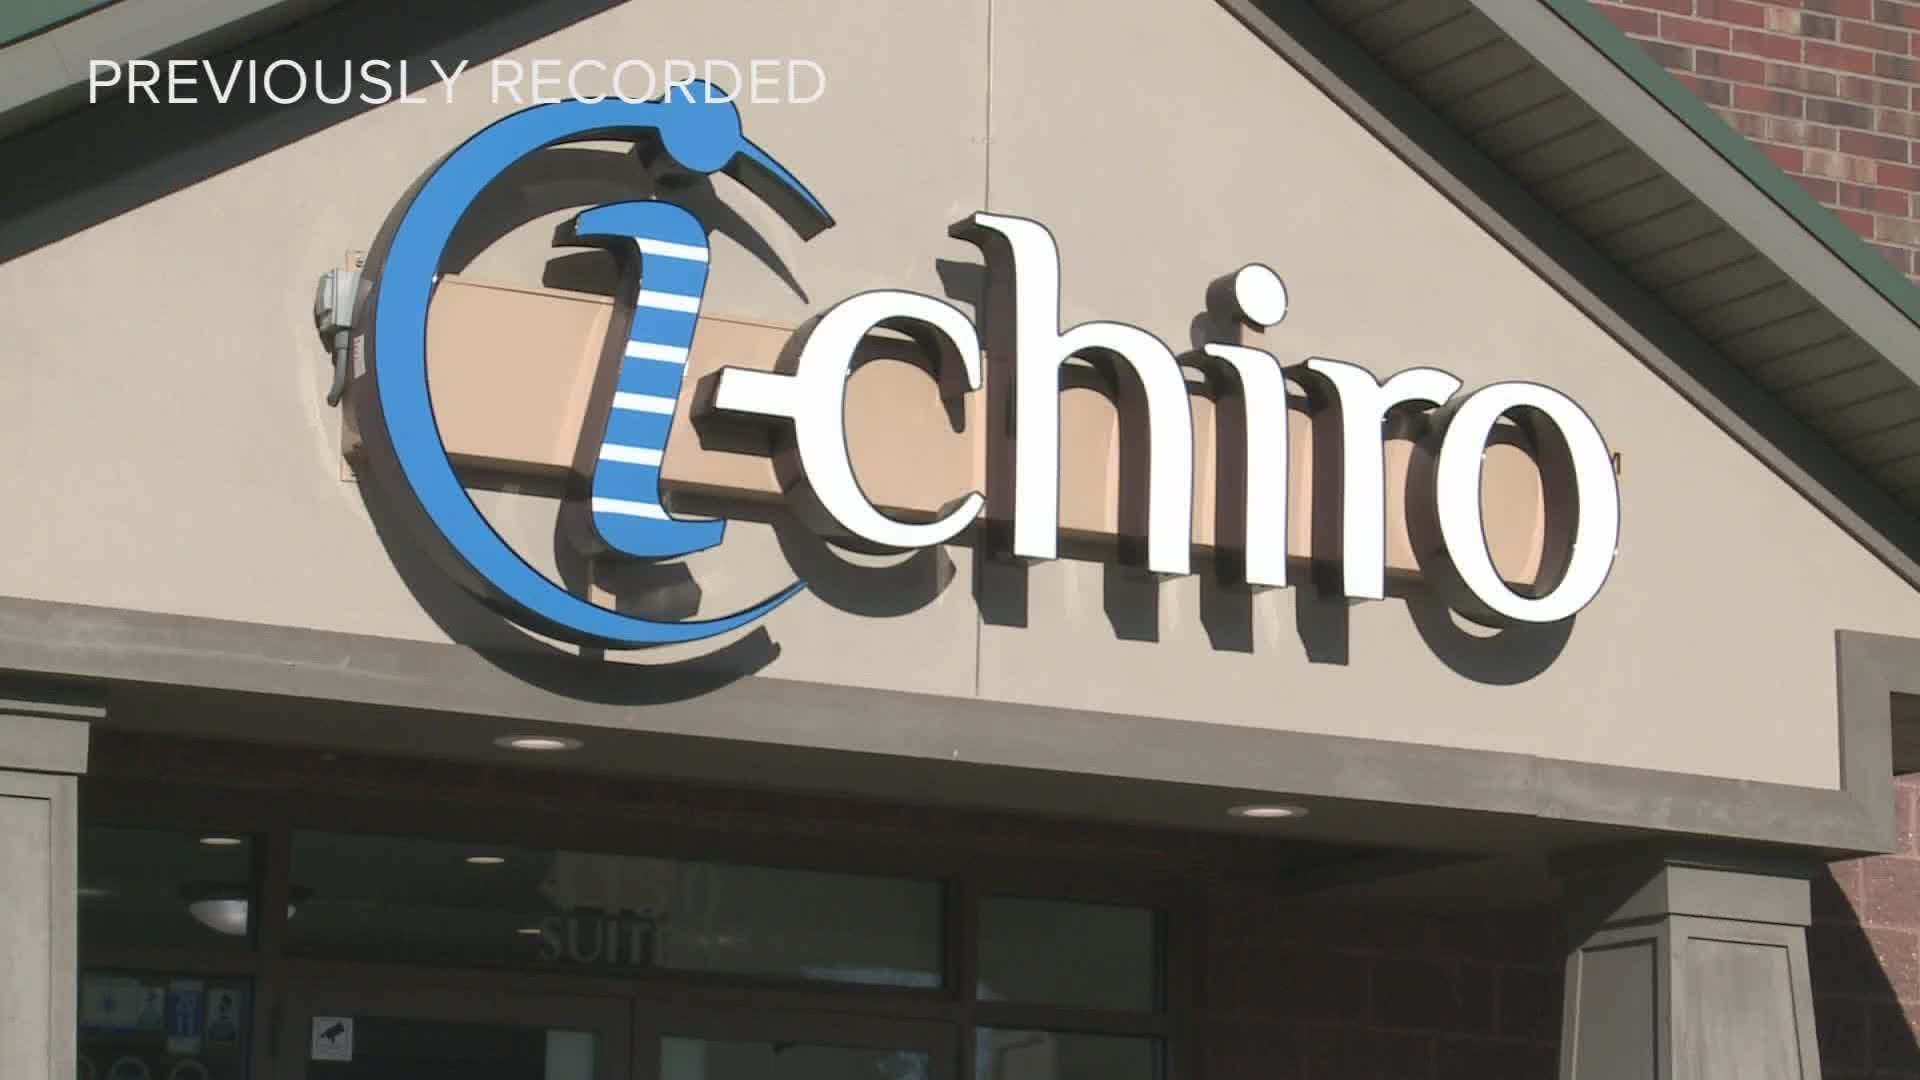 iChiro Clinics add new technology to improve patient outcomes.